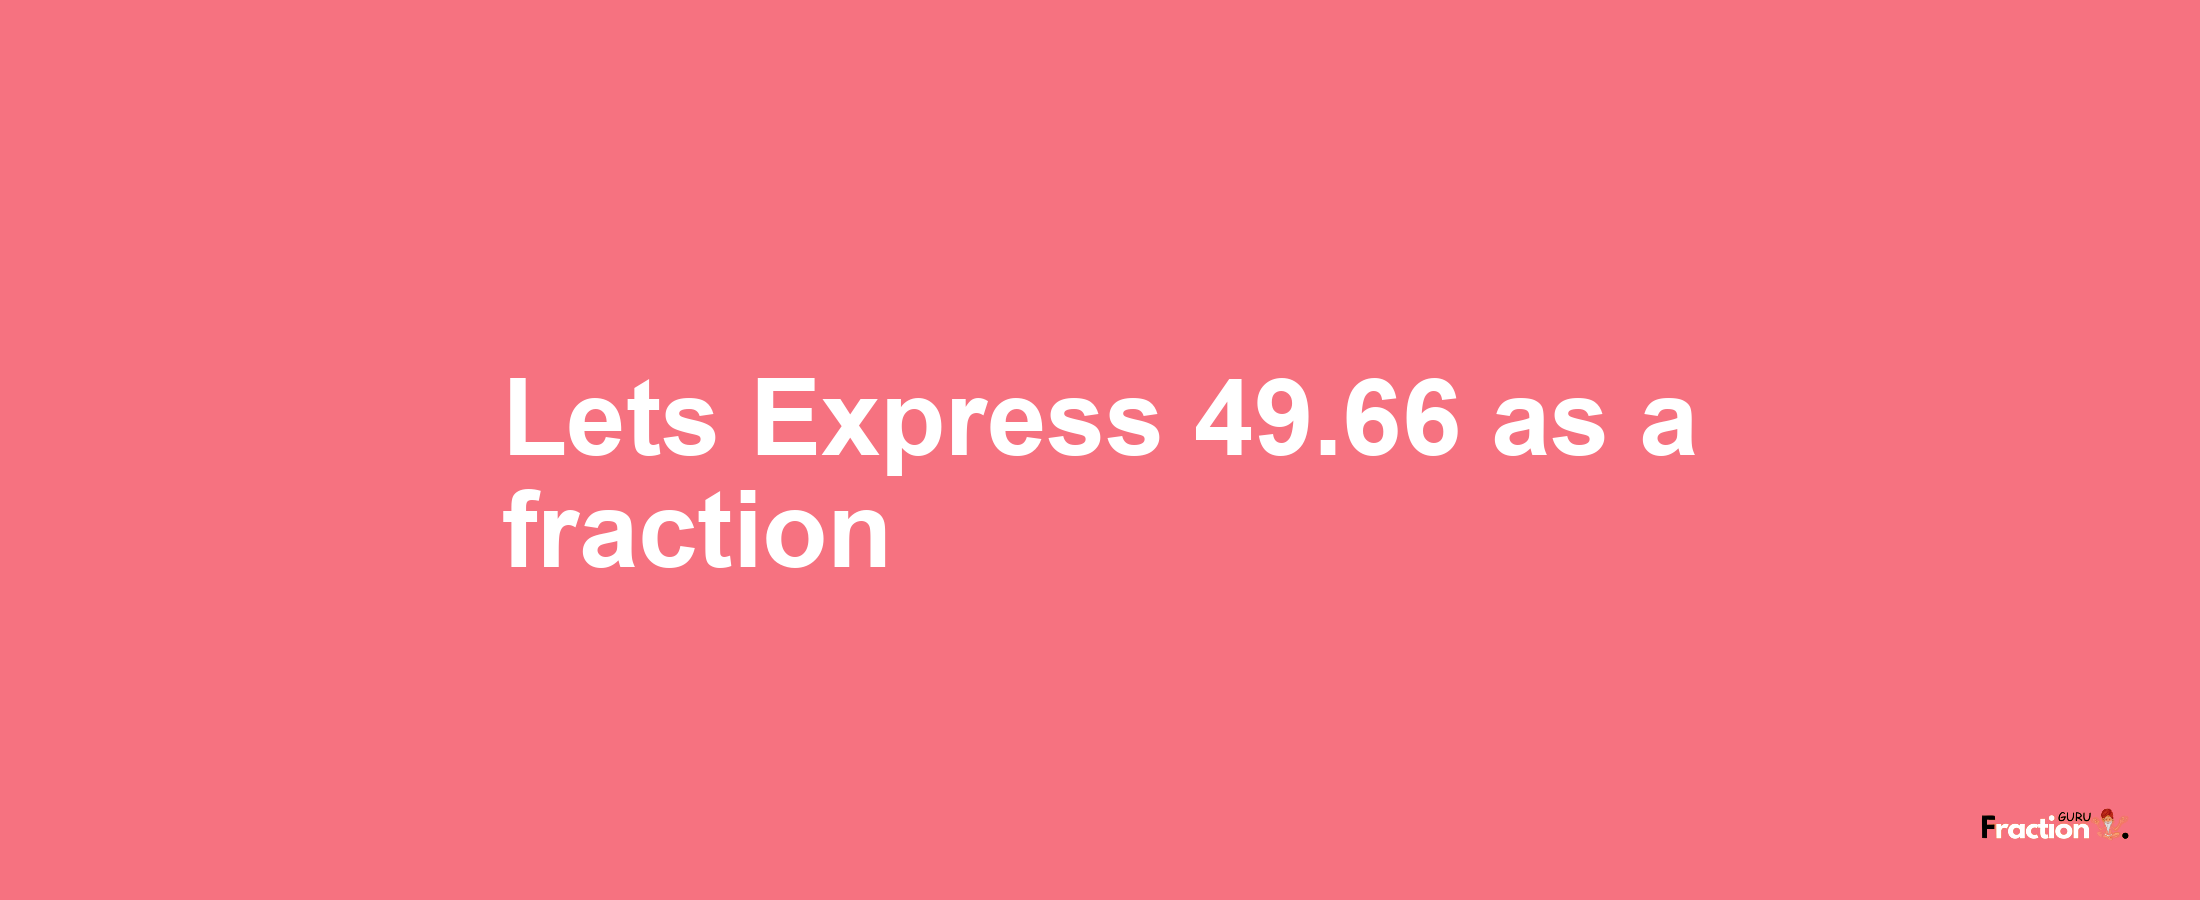 Lets Express 49.66 as afraction